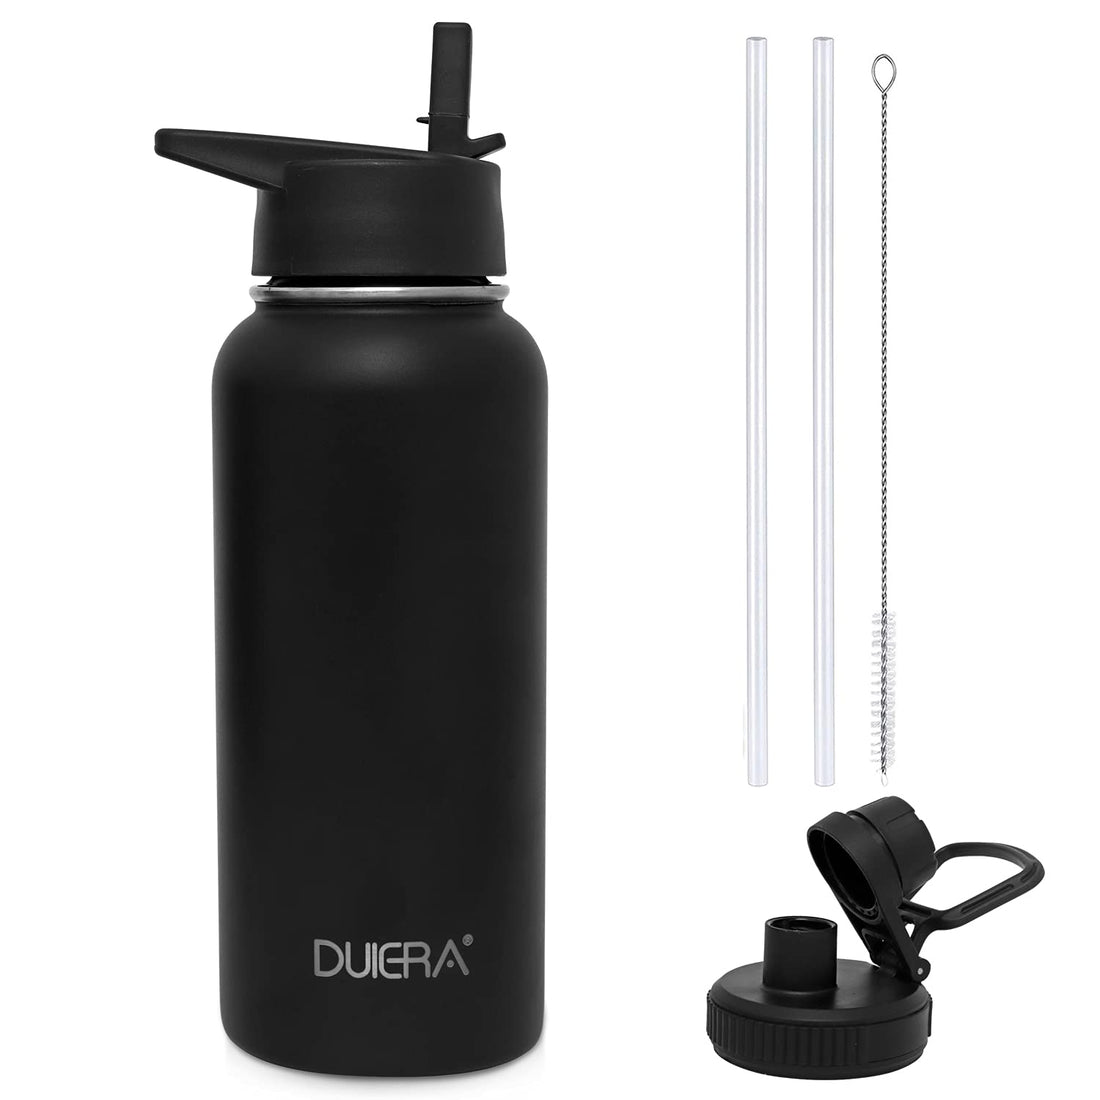 DUIERA 32oz Stainless Steel Water Bottle Double Wall Vacuum Insulated Leak Proof Water Bottle with Straw & Spout Lids for Gym Travel Camping - Black